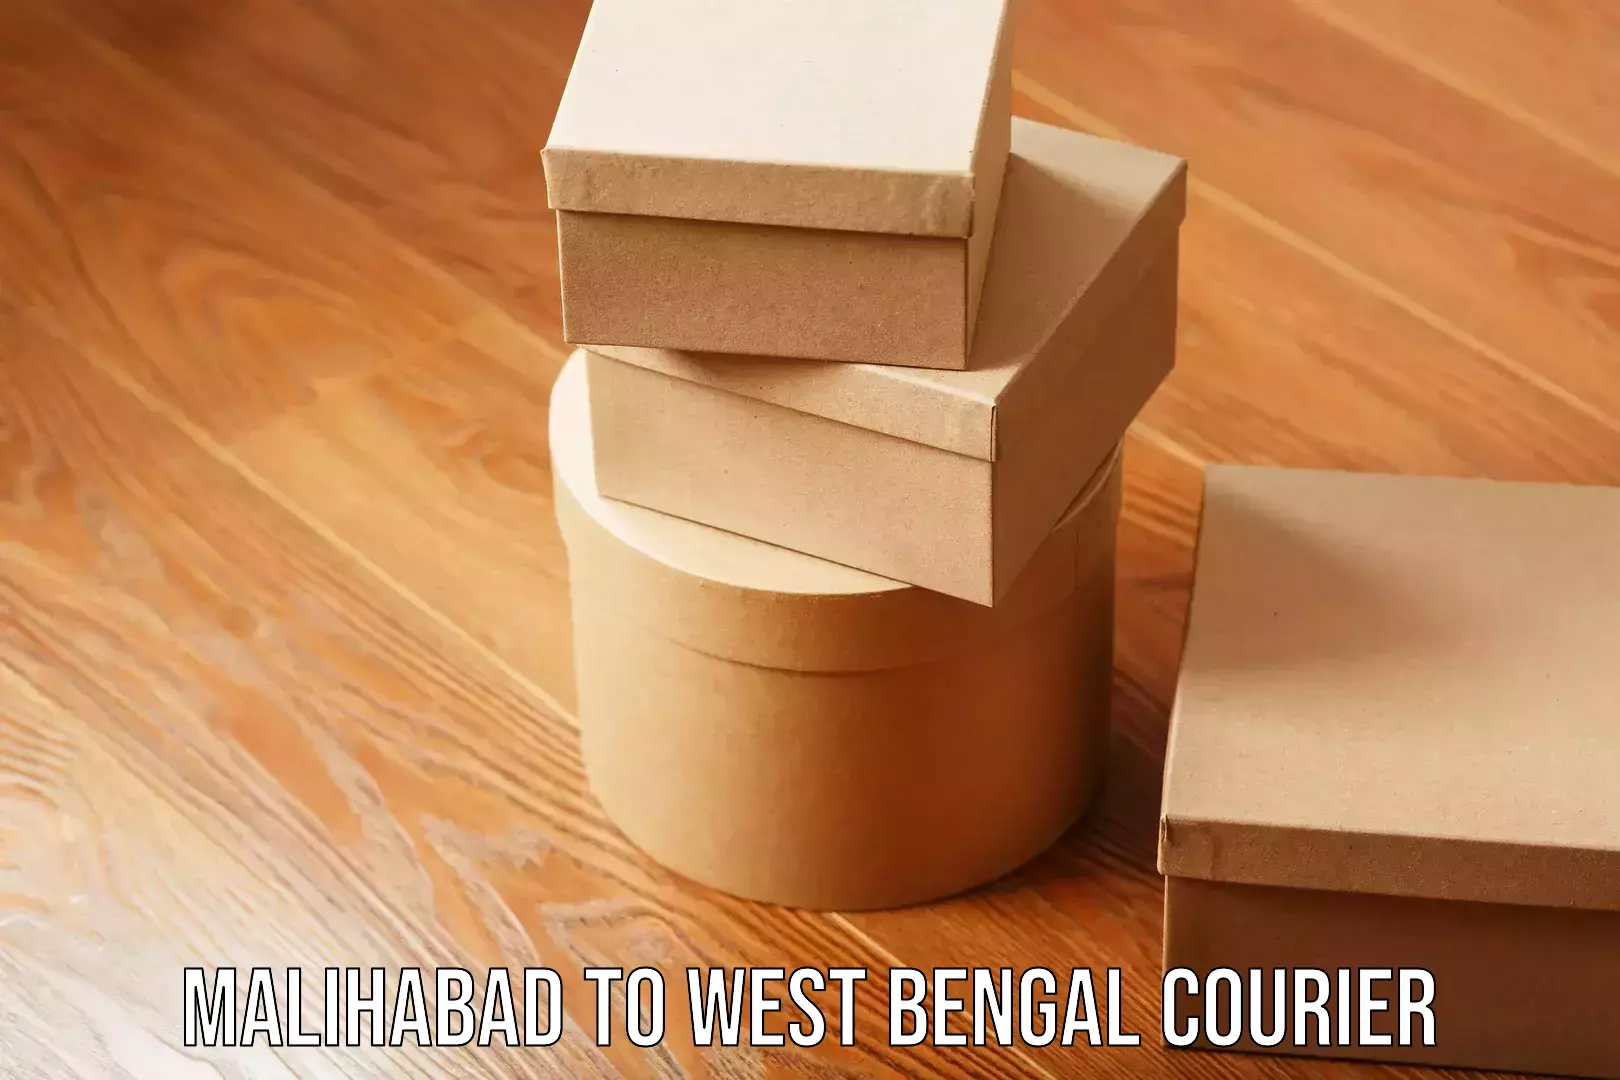 Furniture delivery service Malihabad to West Bengal